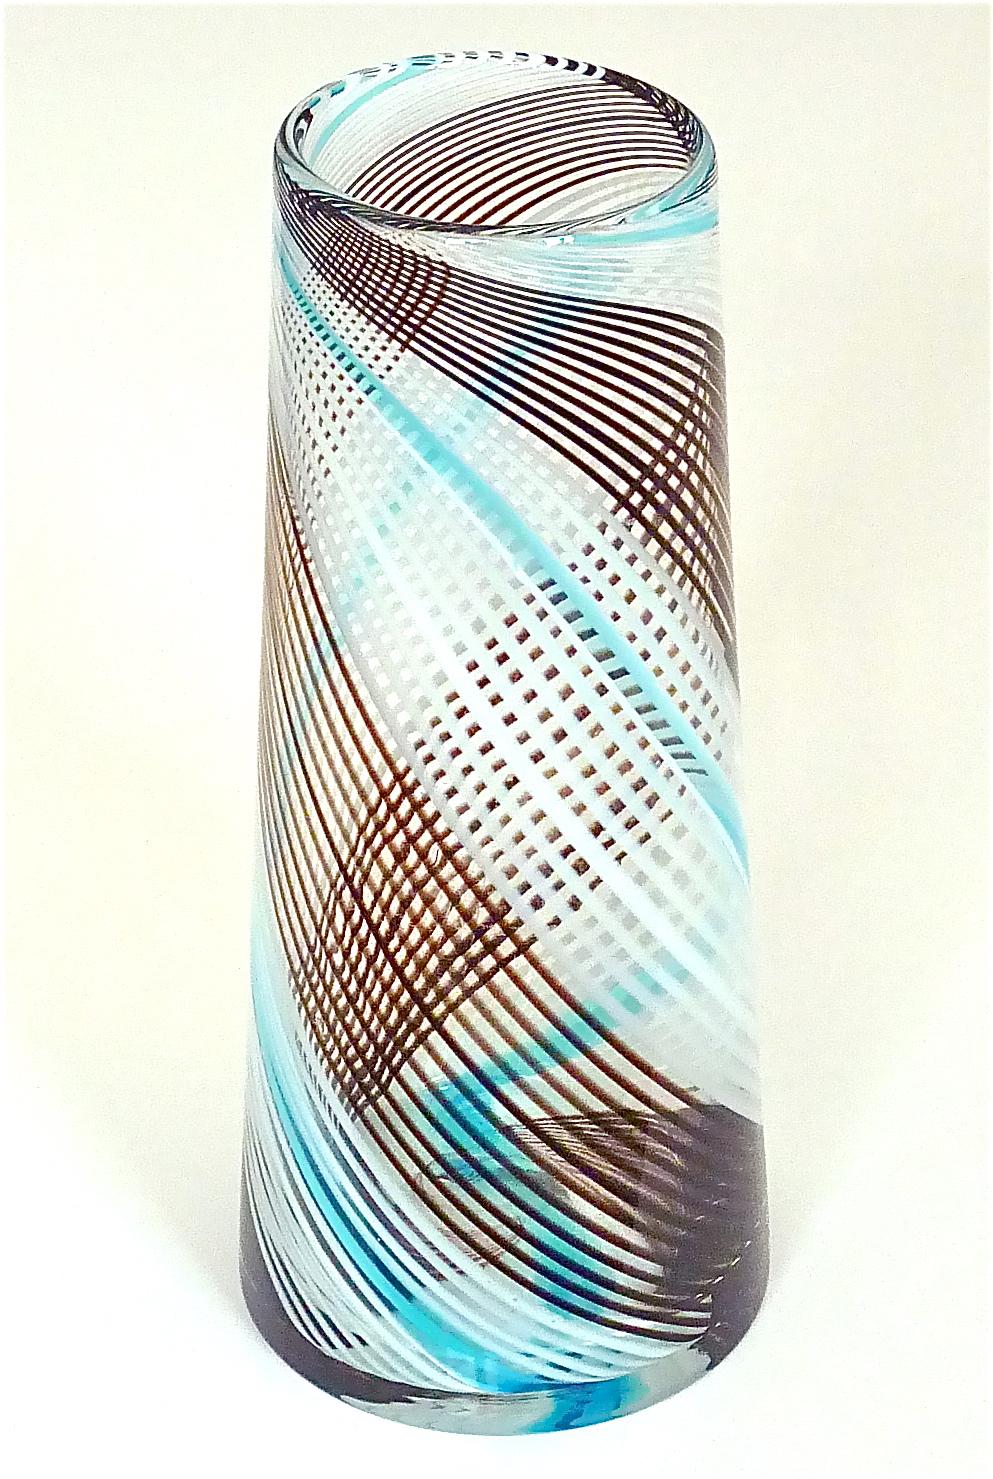 Large Murano Glass Vase Dino Martens Aureliano Toso Style White Blue 1950s 60s  For Sale 4